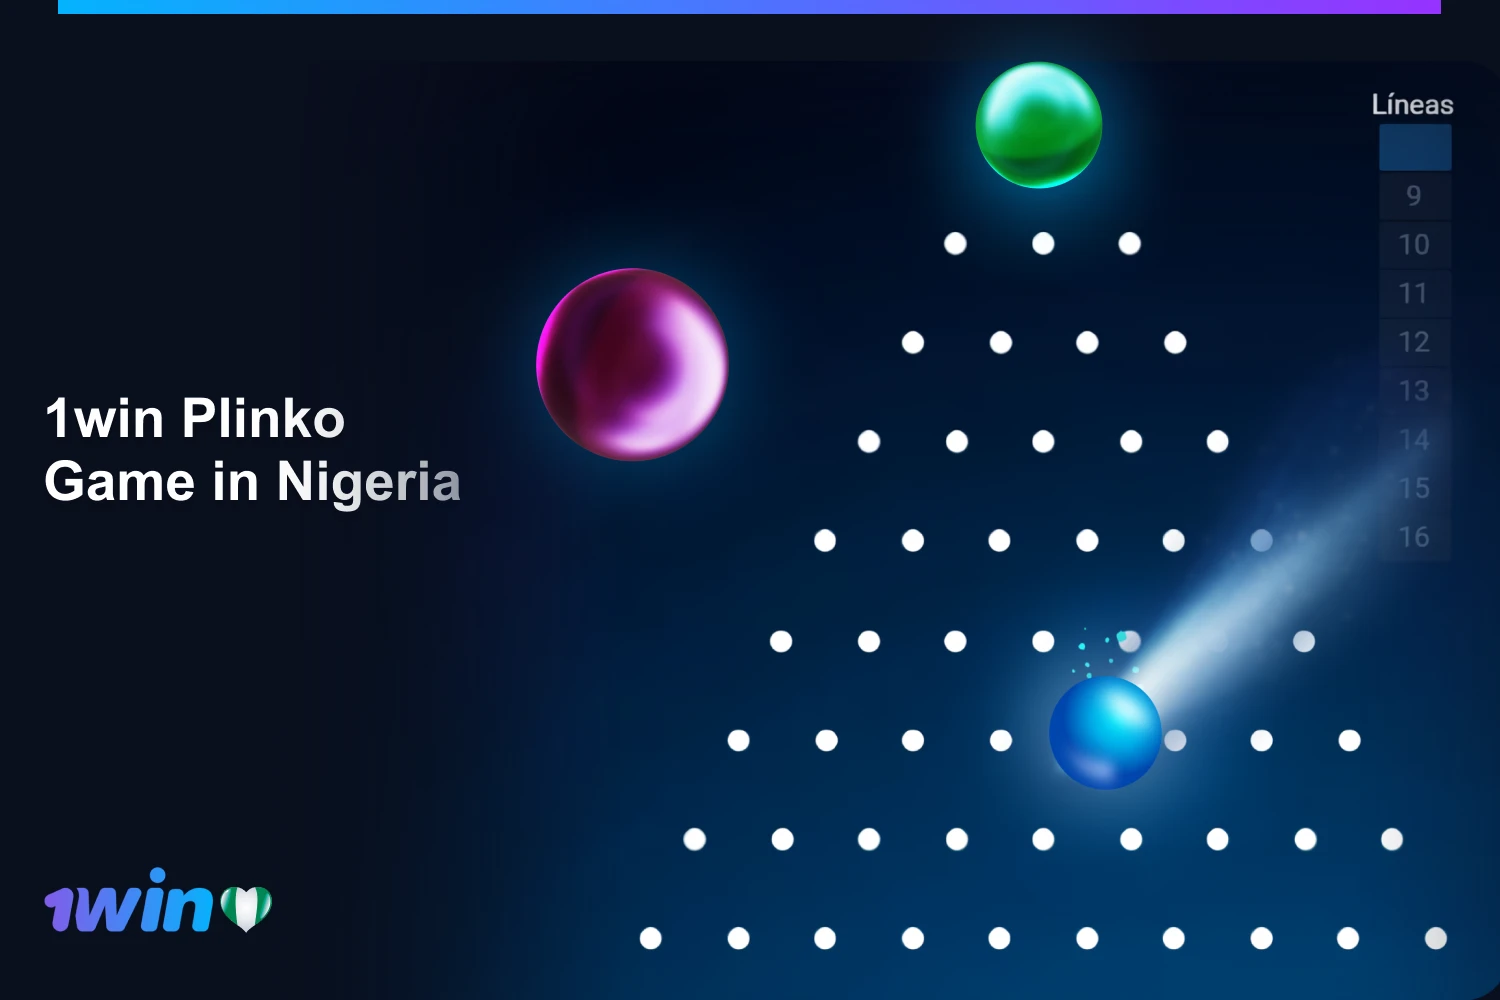 In the games collection of gambling site 1win Nigeria there is a popular Plinko game